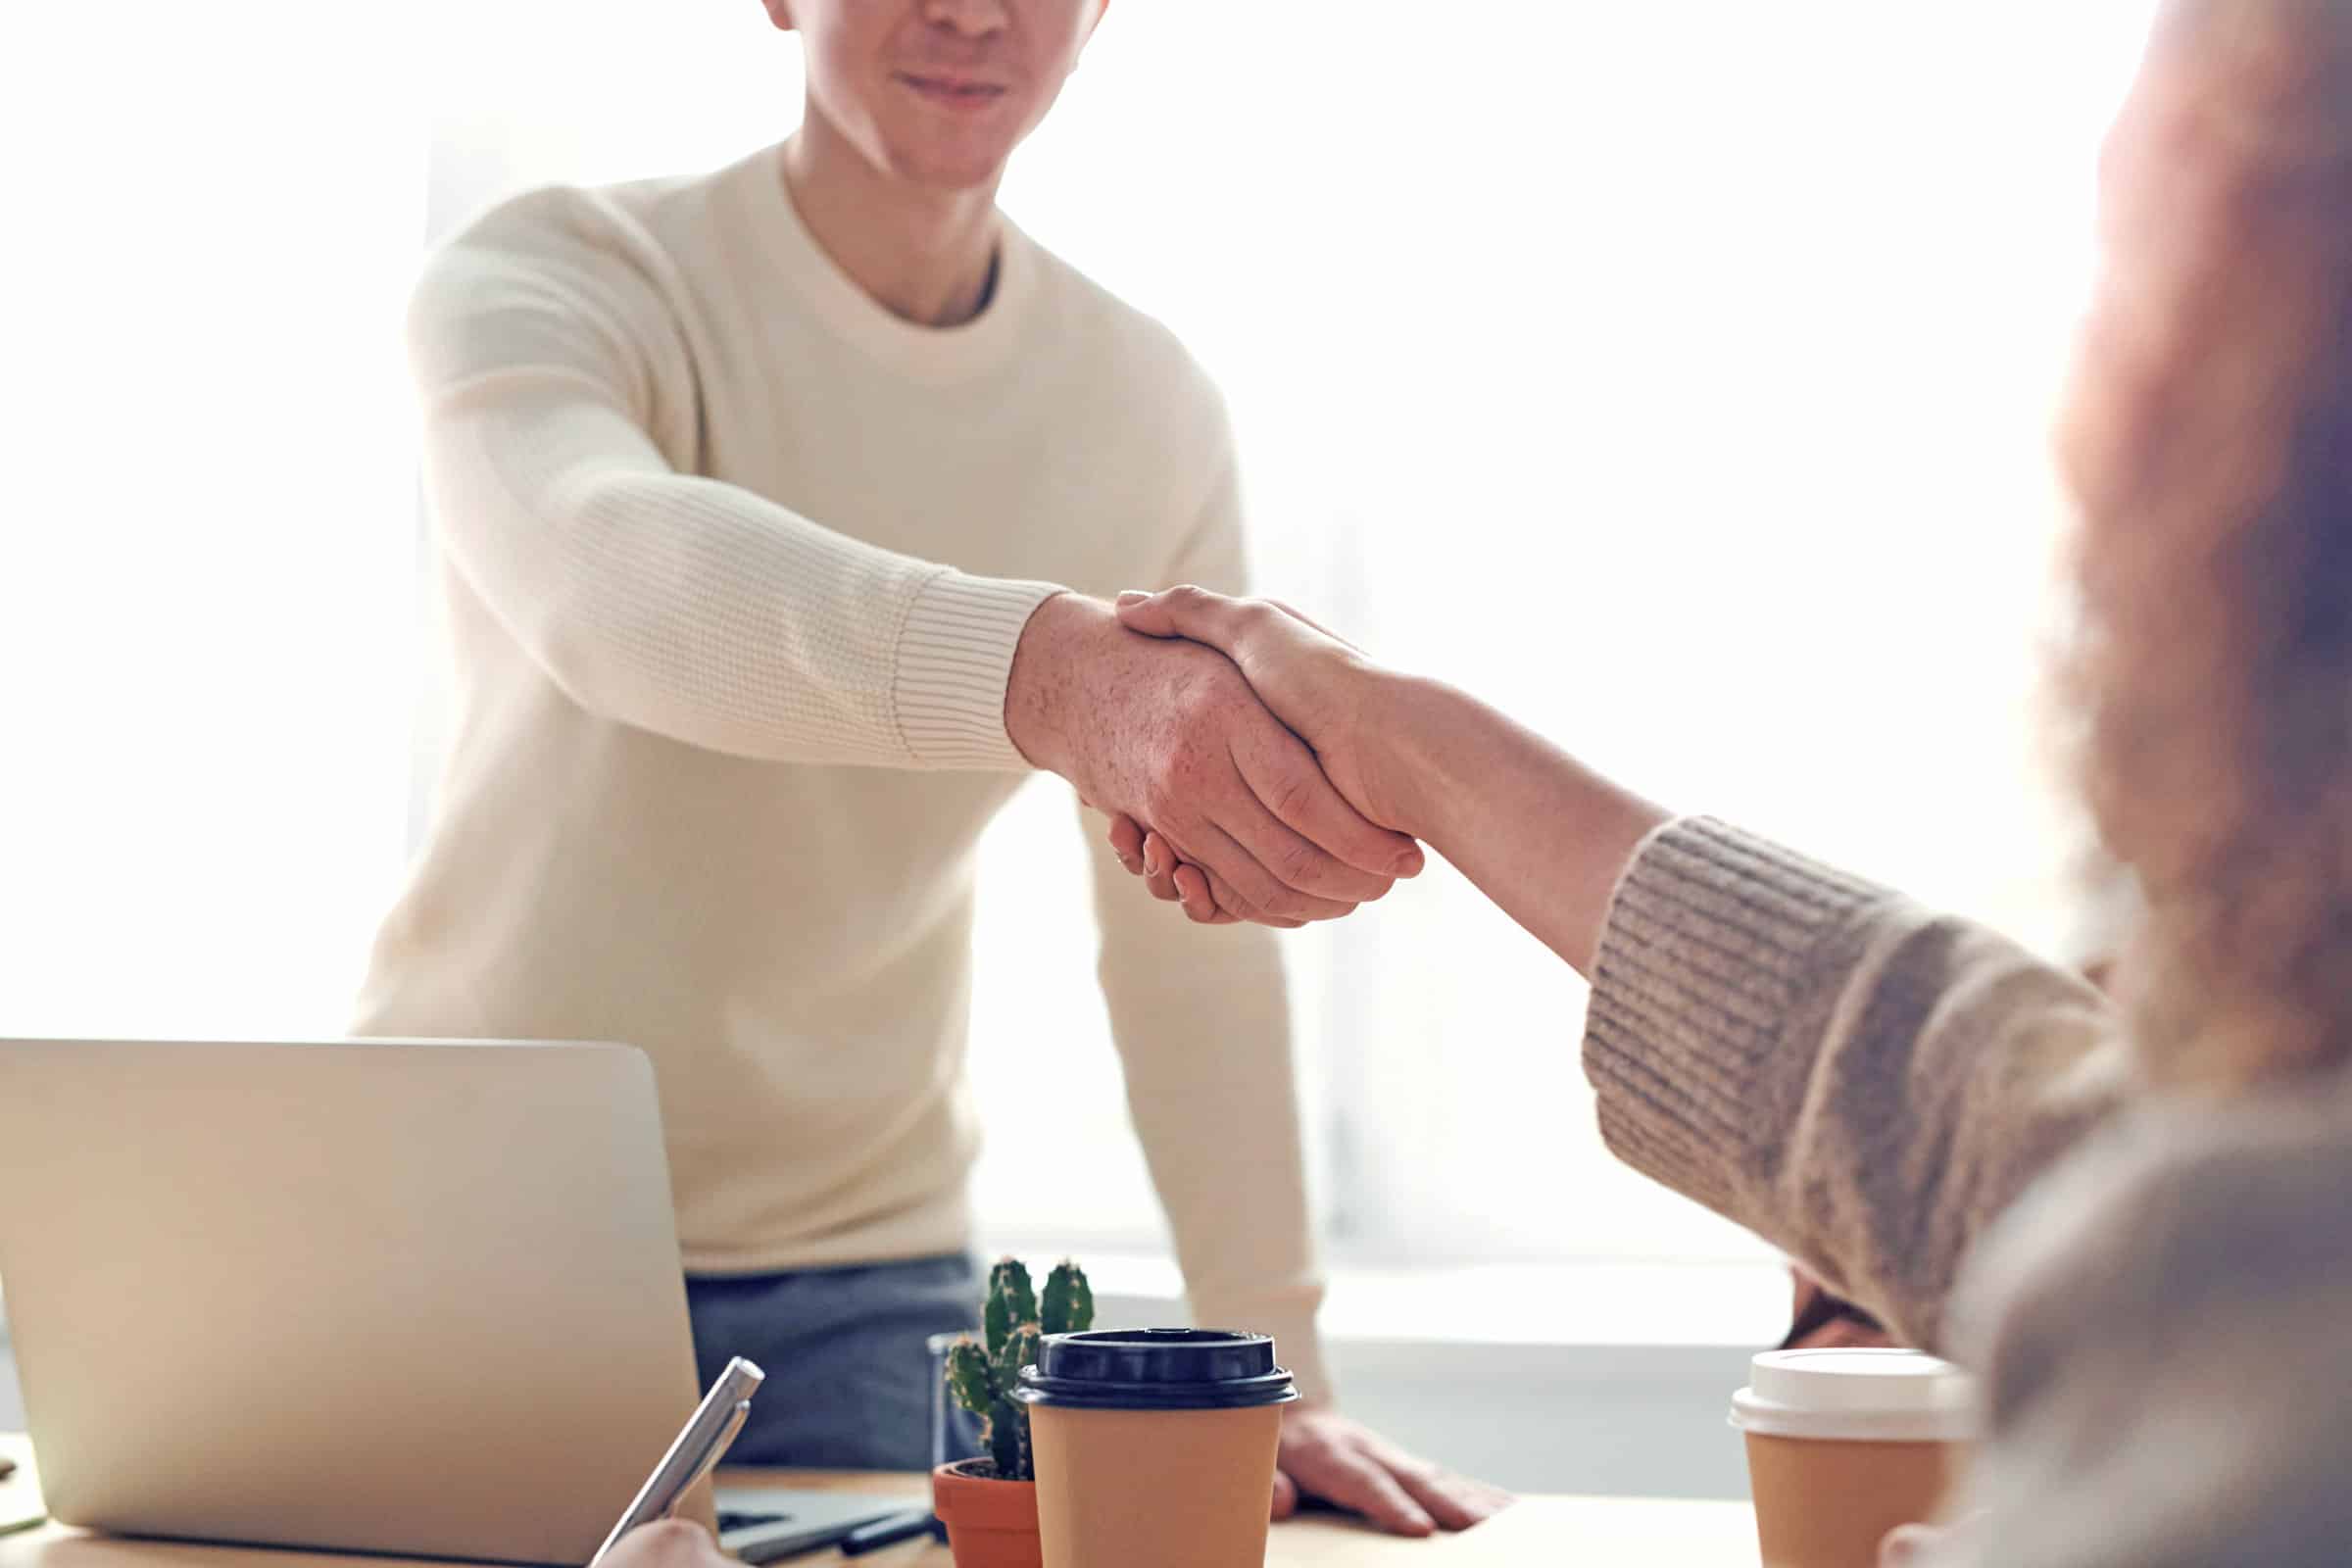 A man and a woman shaking hands at a desk, implying a deal has been made.